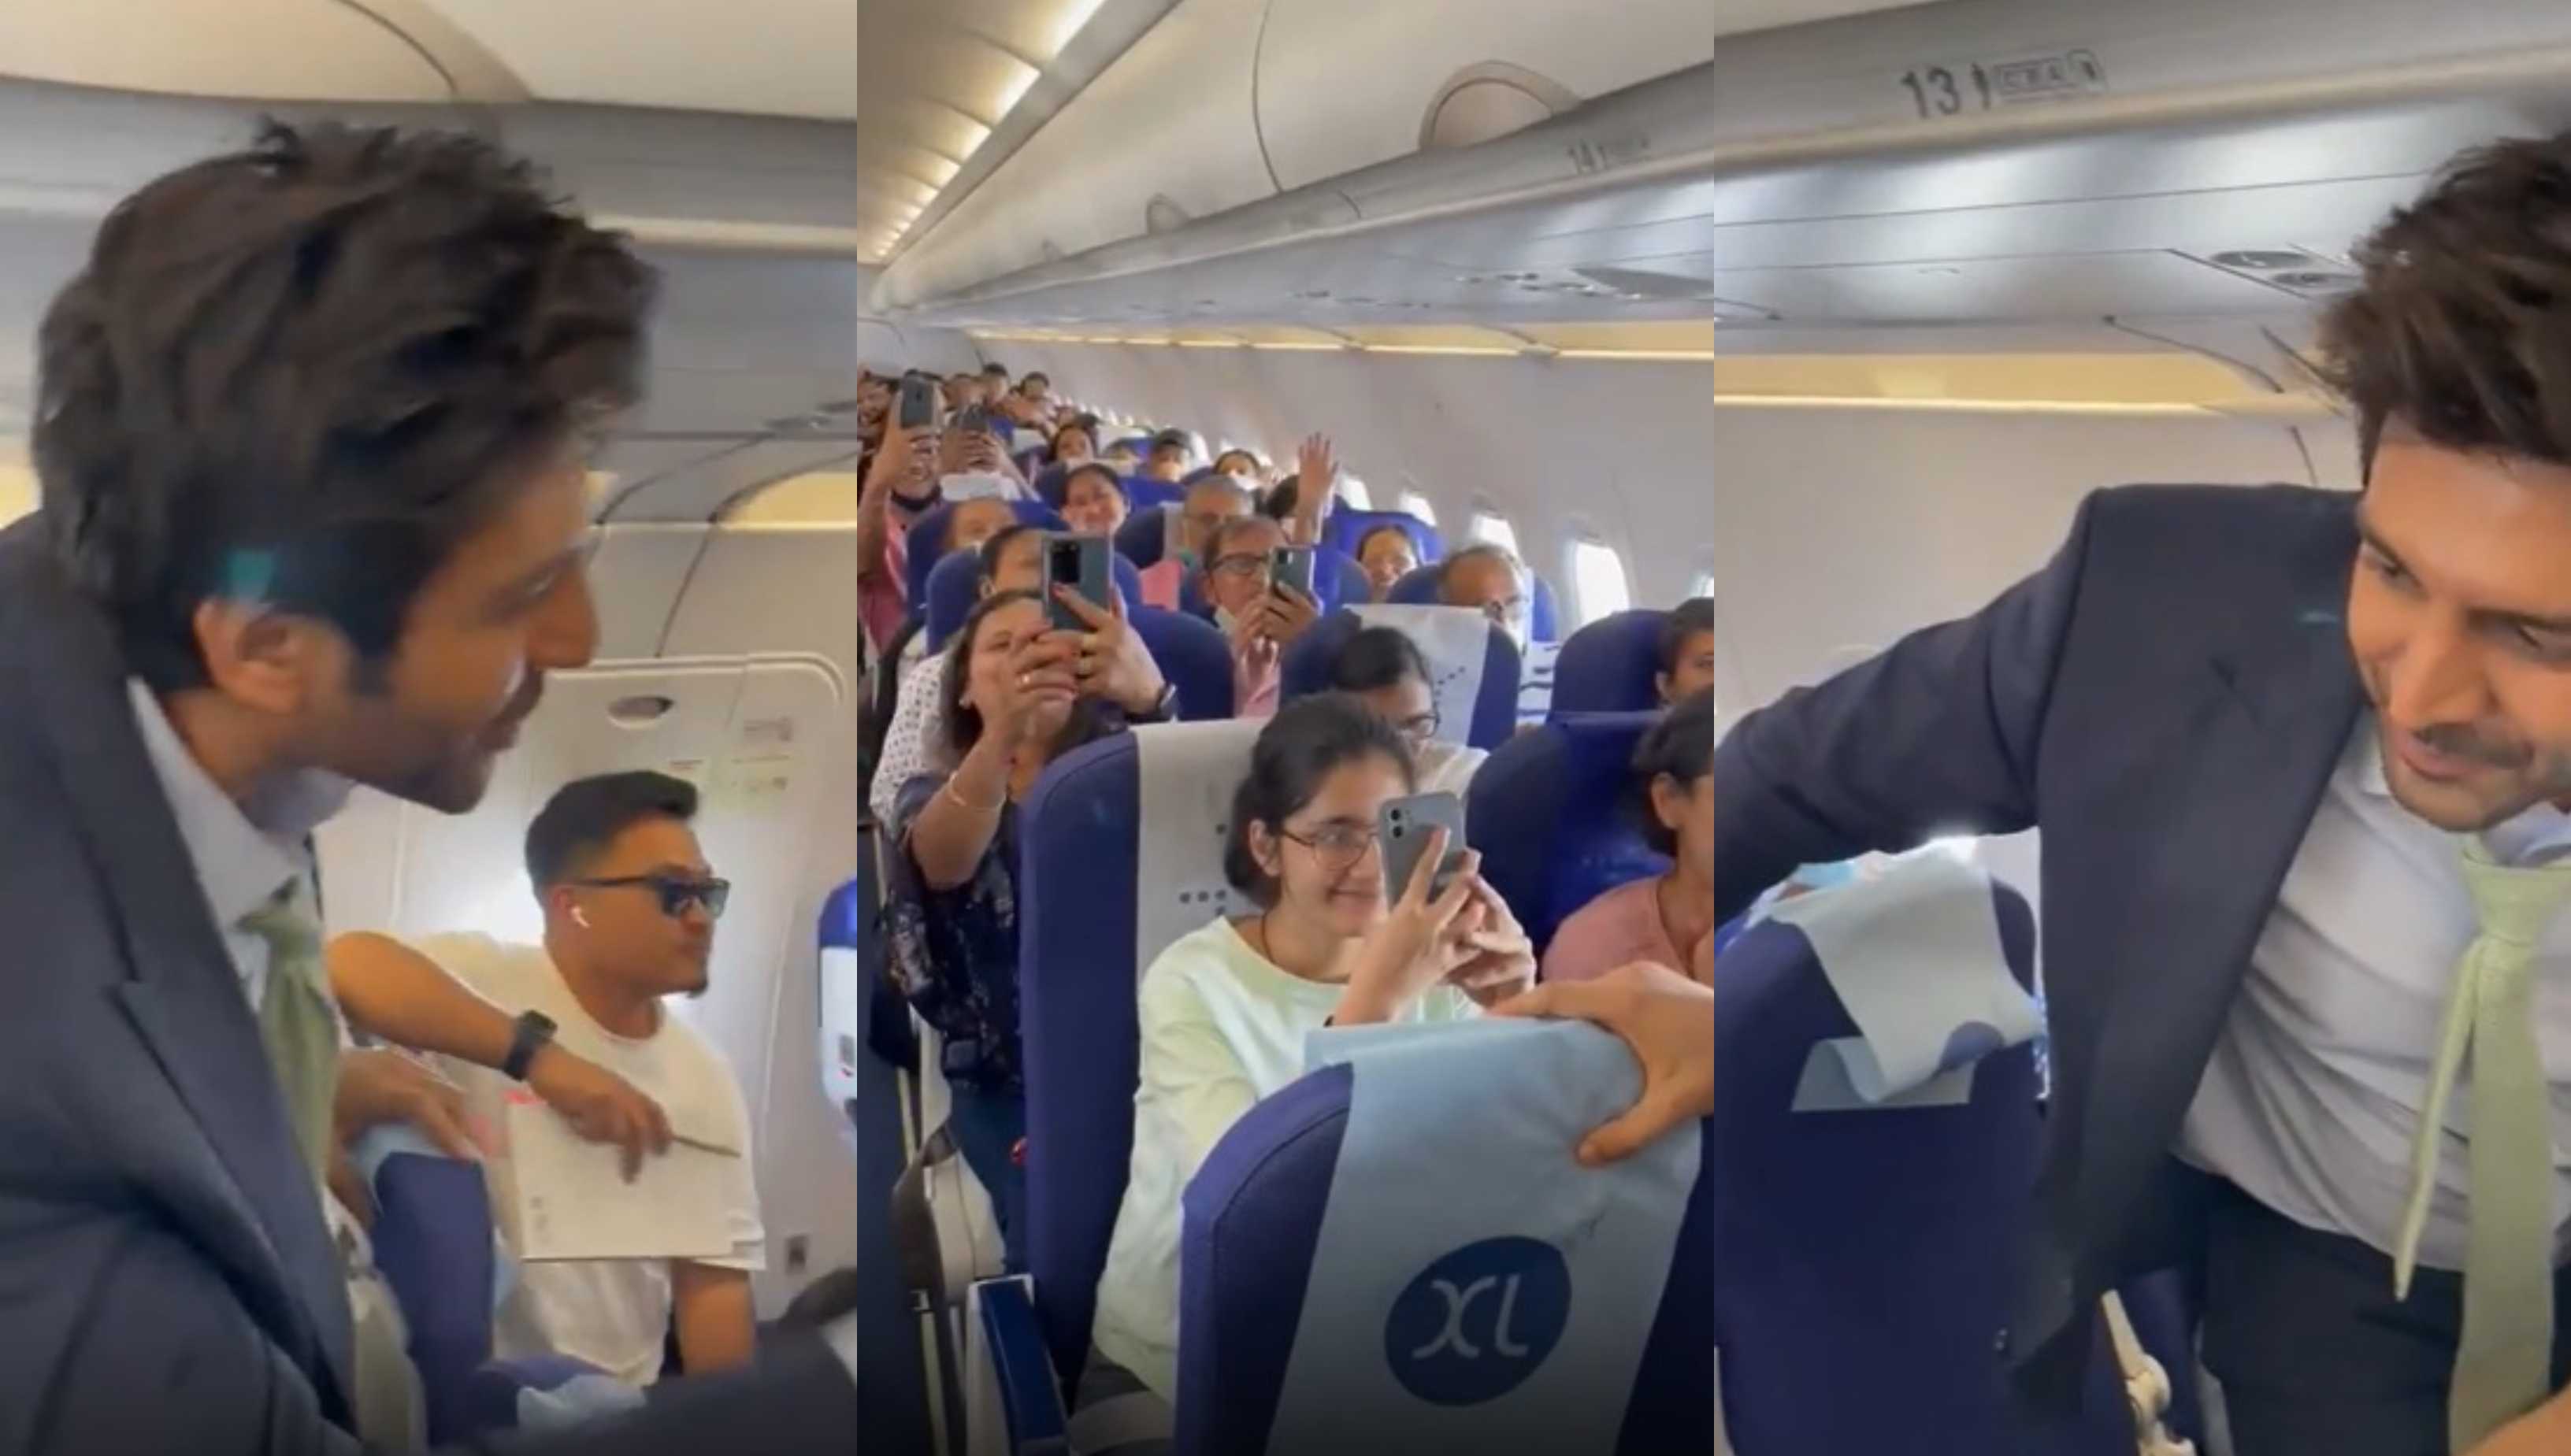 Kartik Aaryan enjoys a meet and greet with ecstatic fans while travelling economy; watch